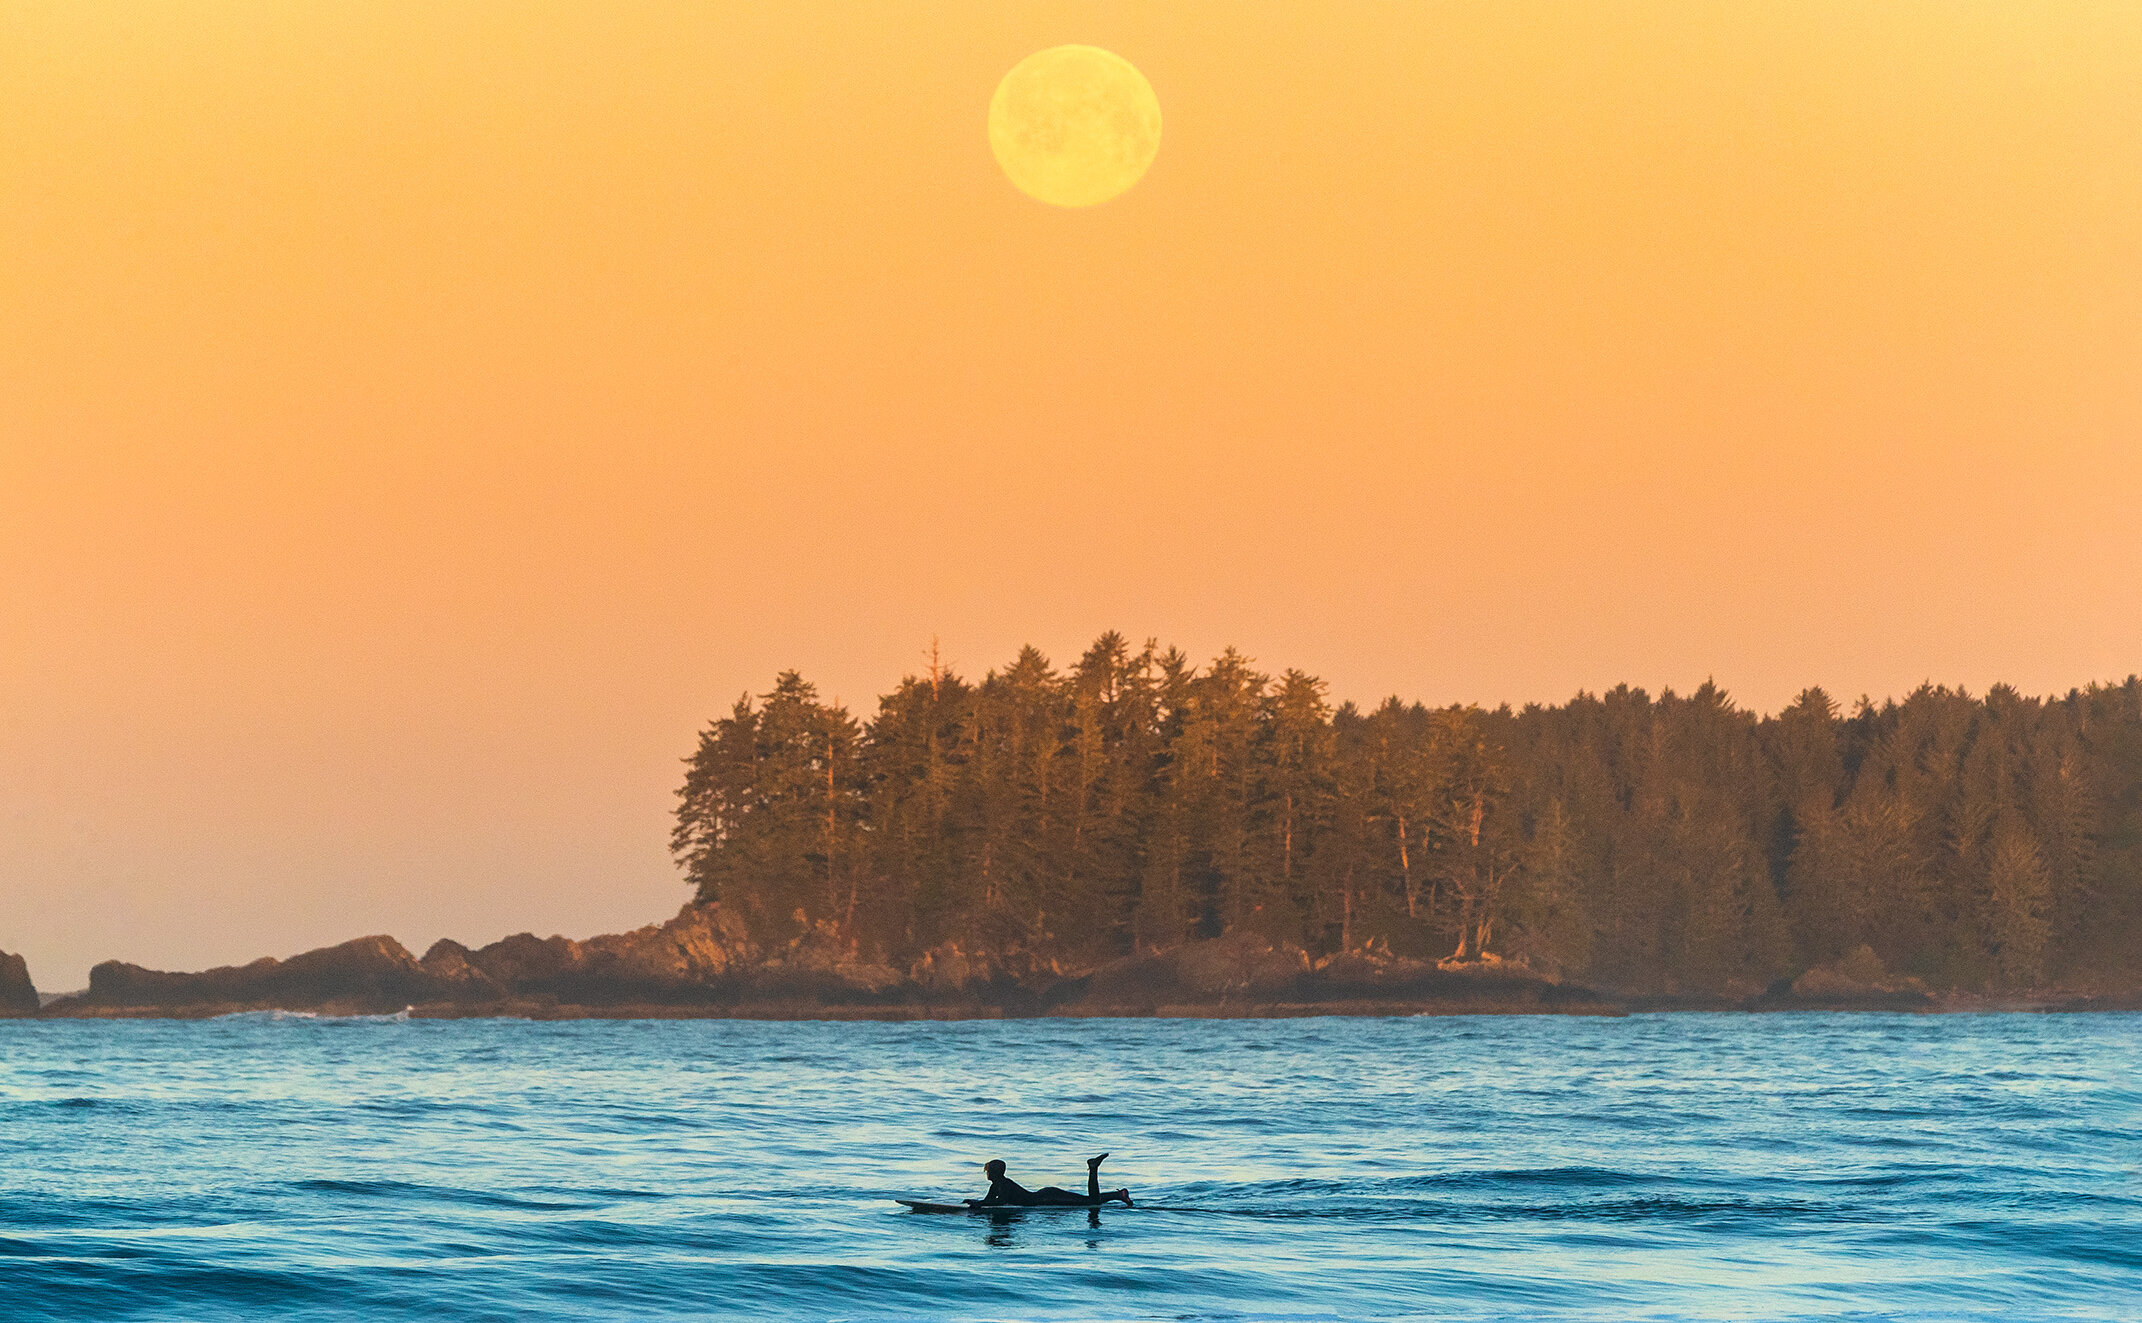 Surfer paddling out on the water at sunrise